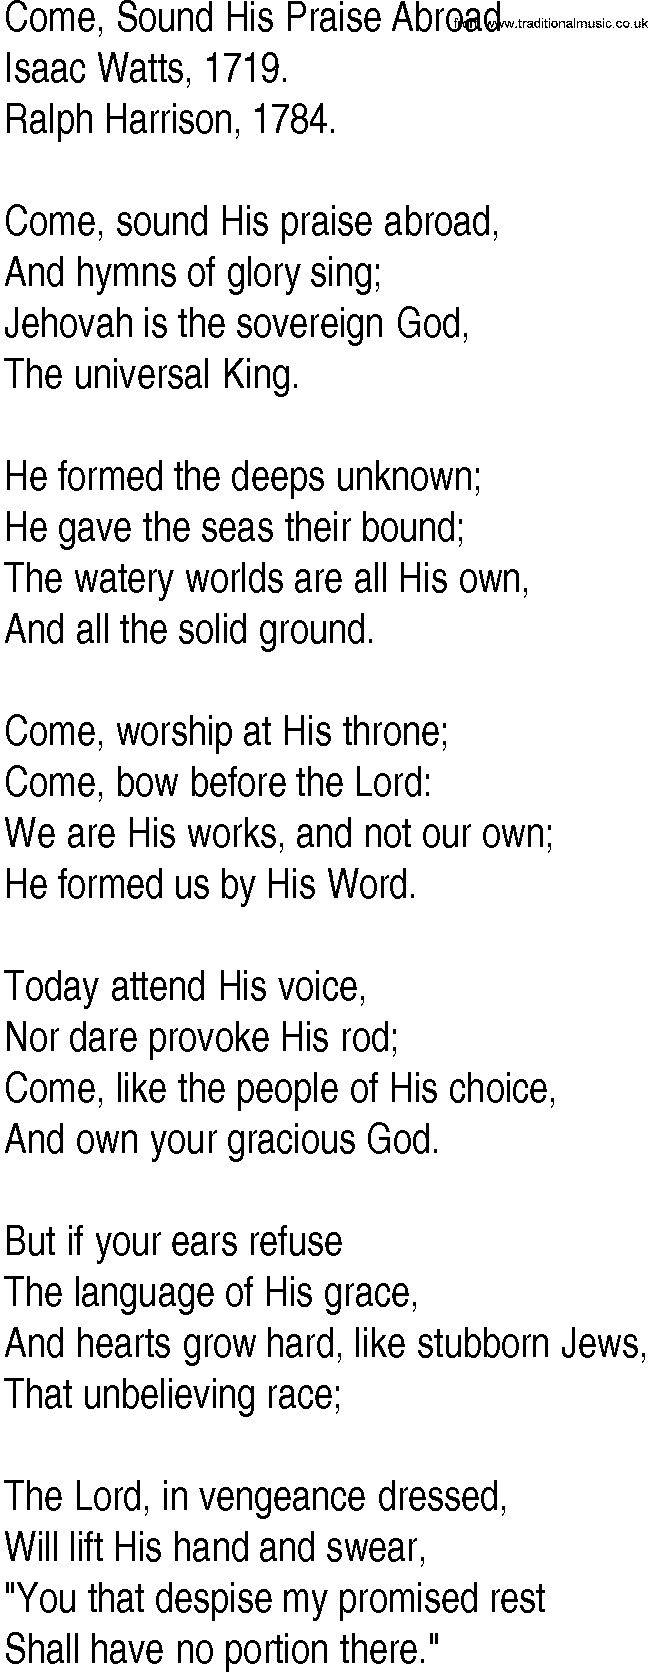 Hymn and Gospel Song: Come, Sound His Praise Abroad by Isaac Watts lyrics